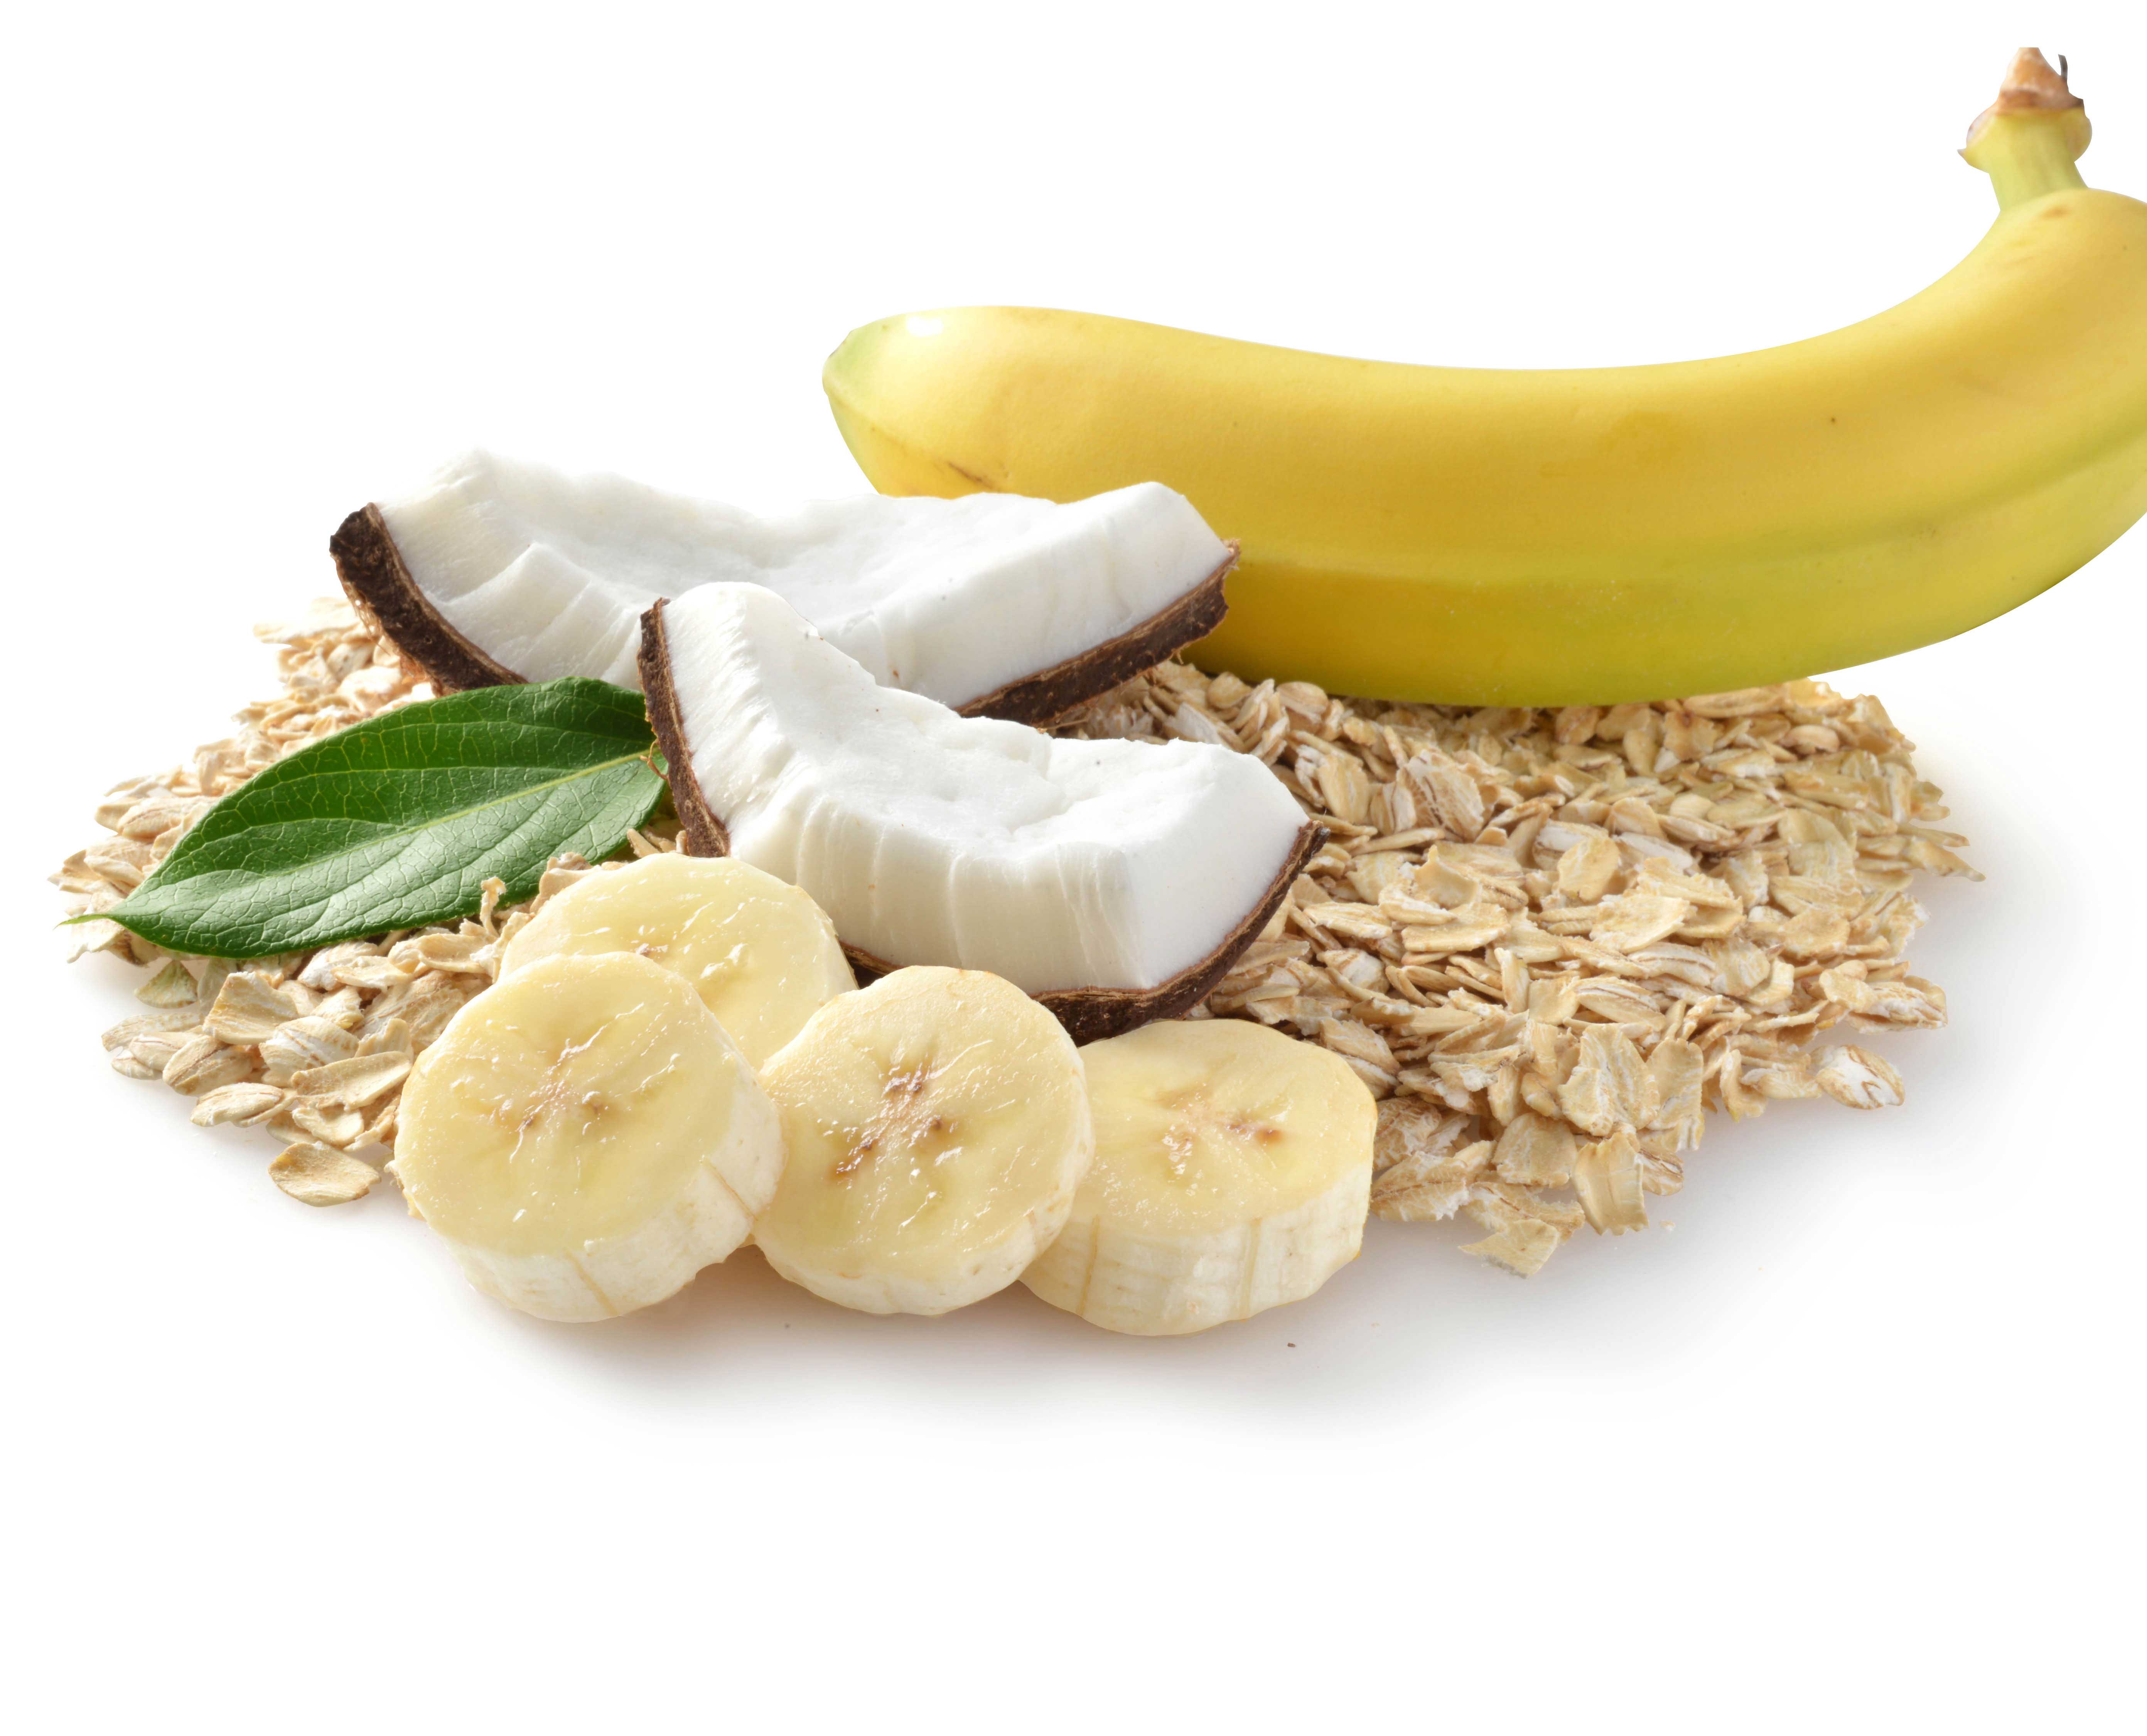 mike wepplo photoreal photography dry oatmeal banana coconut pieces